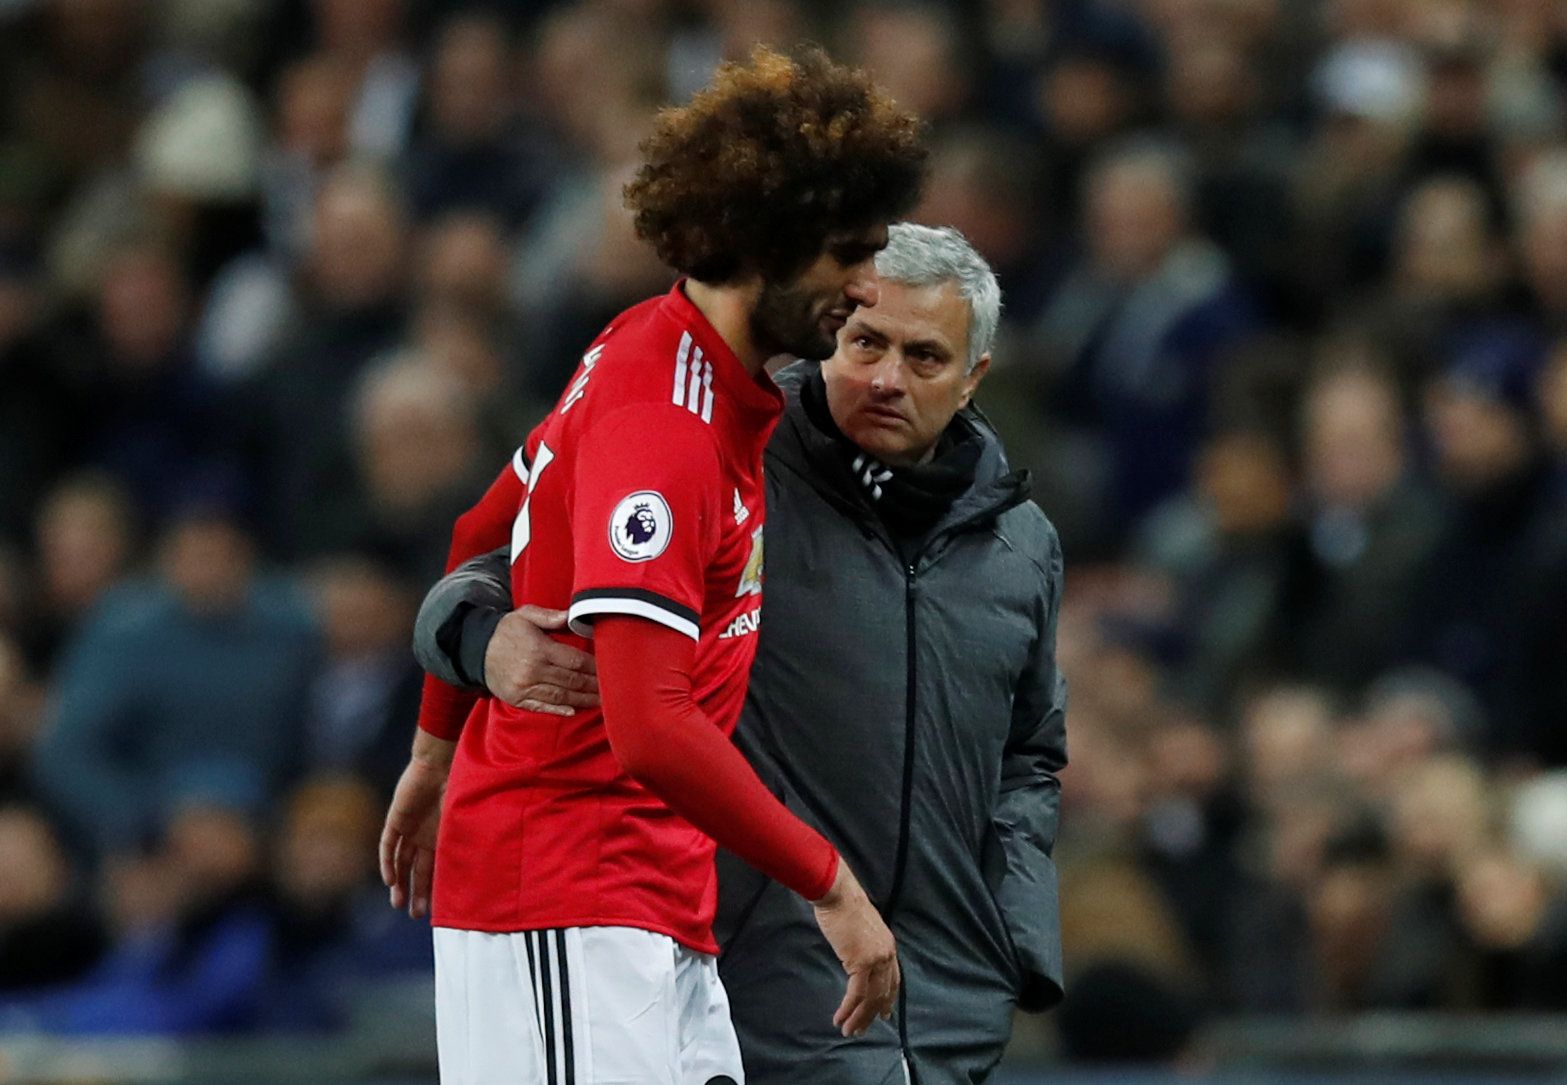 Soccer Football - Premier League - Tottenham Hotspur vs Manchester United - Wembley Stadium, London, Britain - January 31, 2018   Manchester United's Marouane Fellaini gets a hug from manager Jose Mourinho as he is substituted shortly after coming on    REUTERS/Eddie Keogh    EDITORIAL USE ONLY. No use with unauthorized audio, video, data, fixture lists, club/league logos or 